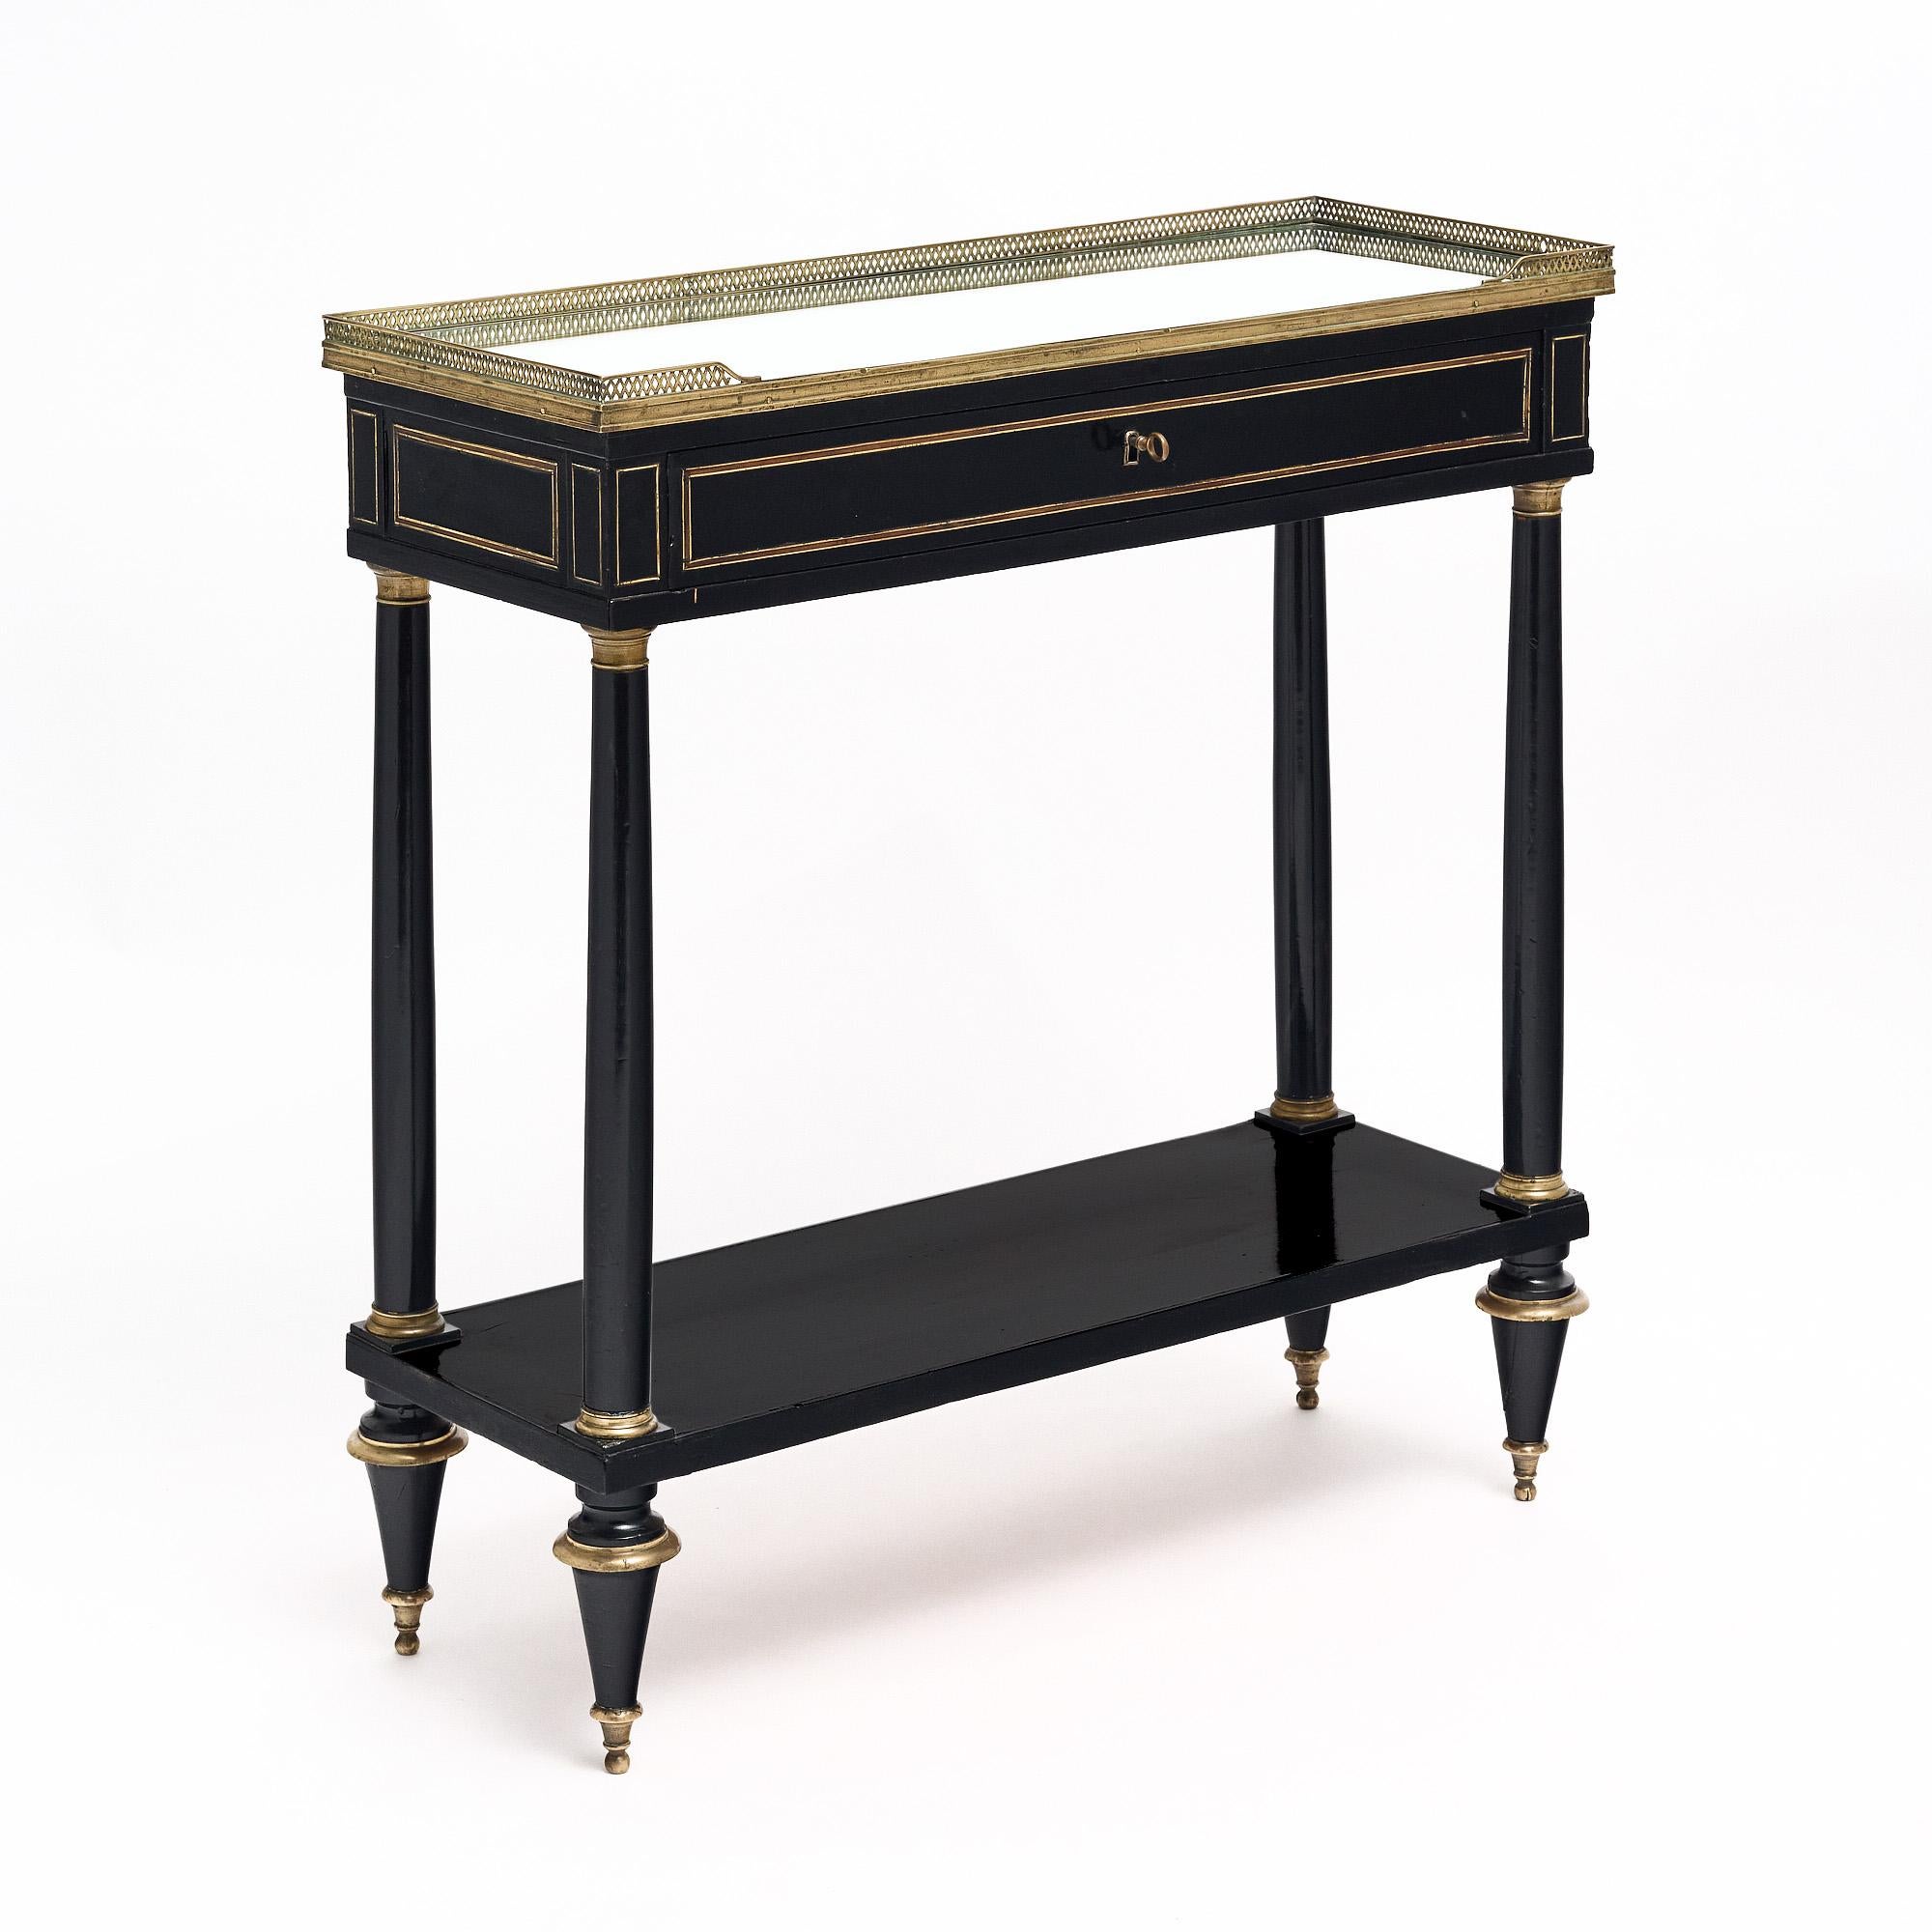 Console table from France in the Louis XVI style. This piece is finished with a lustrous museum quality French polish and is ebonized. There is a single dovetailed drawer with working lock and key. The four legs are tapered and support a lower shelf